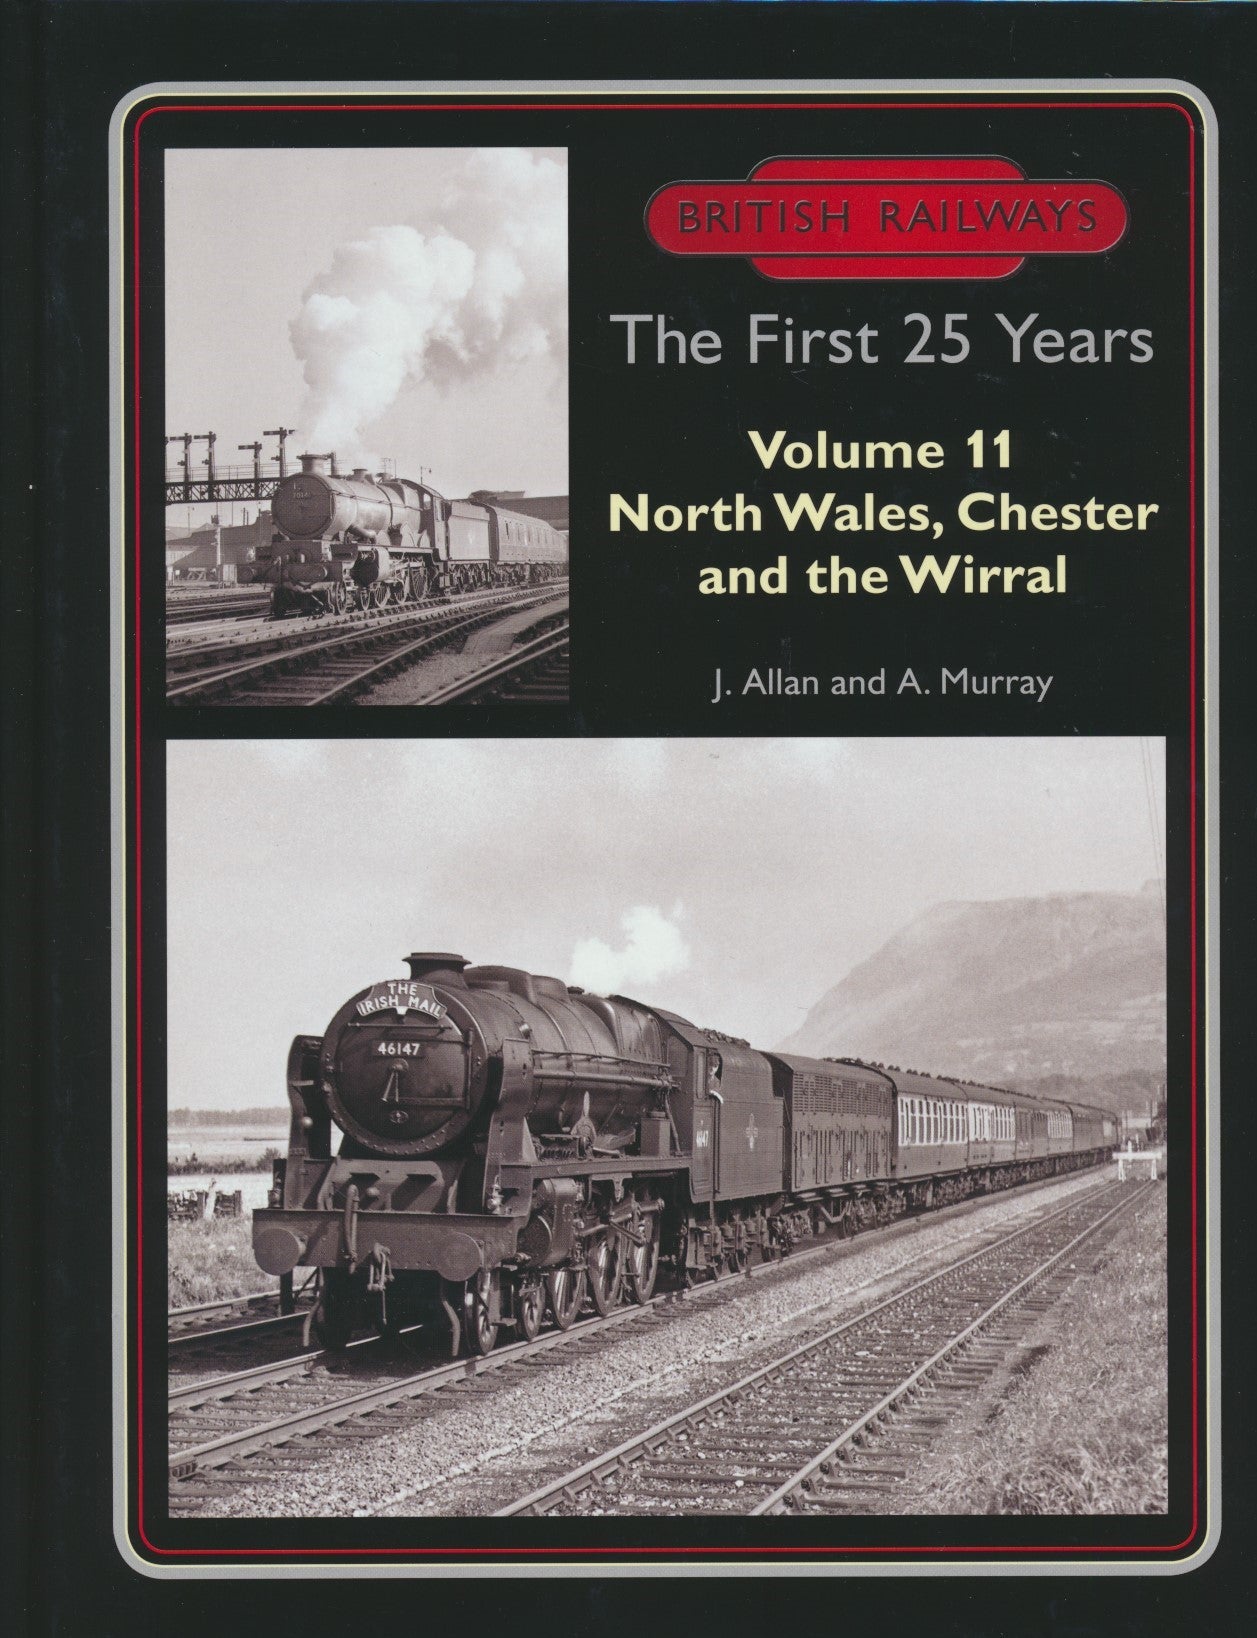 British Railways The First 25 Years, Volume 11: North Wales, Chester and the Wirral